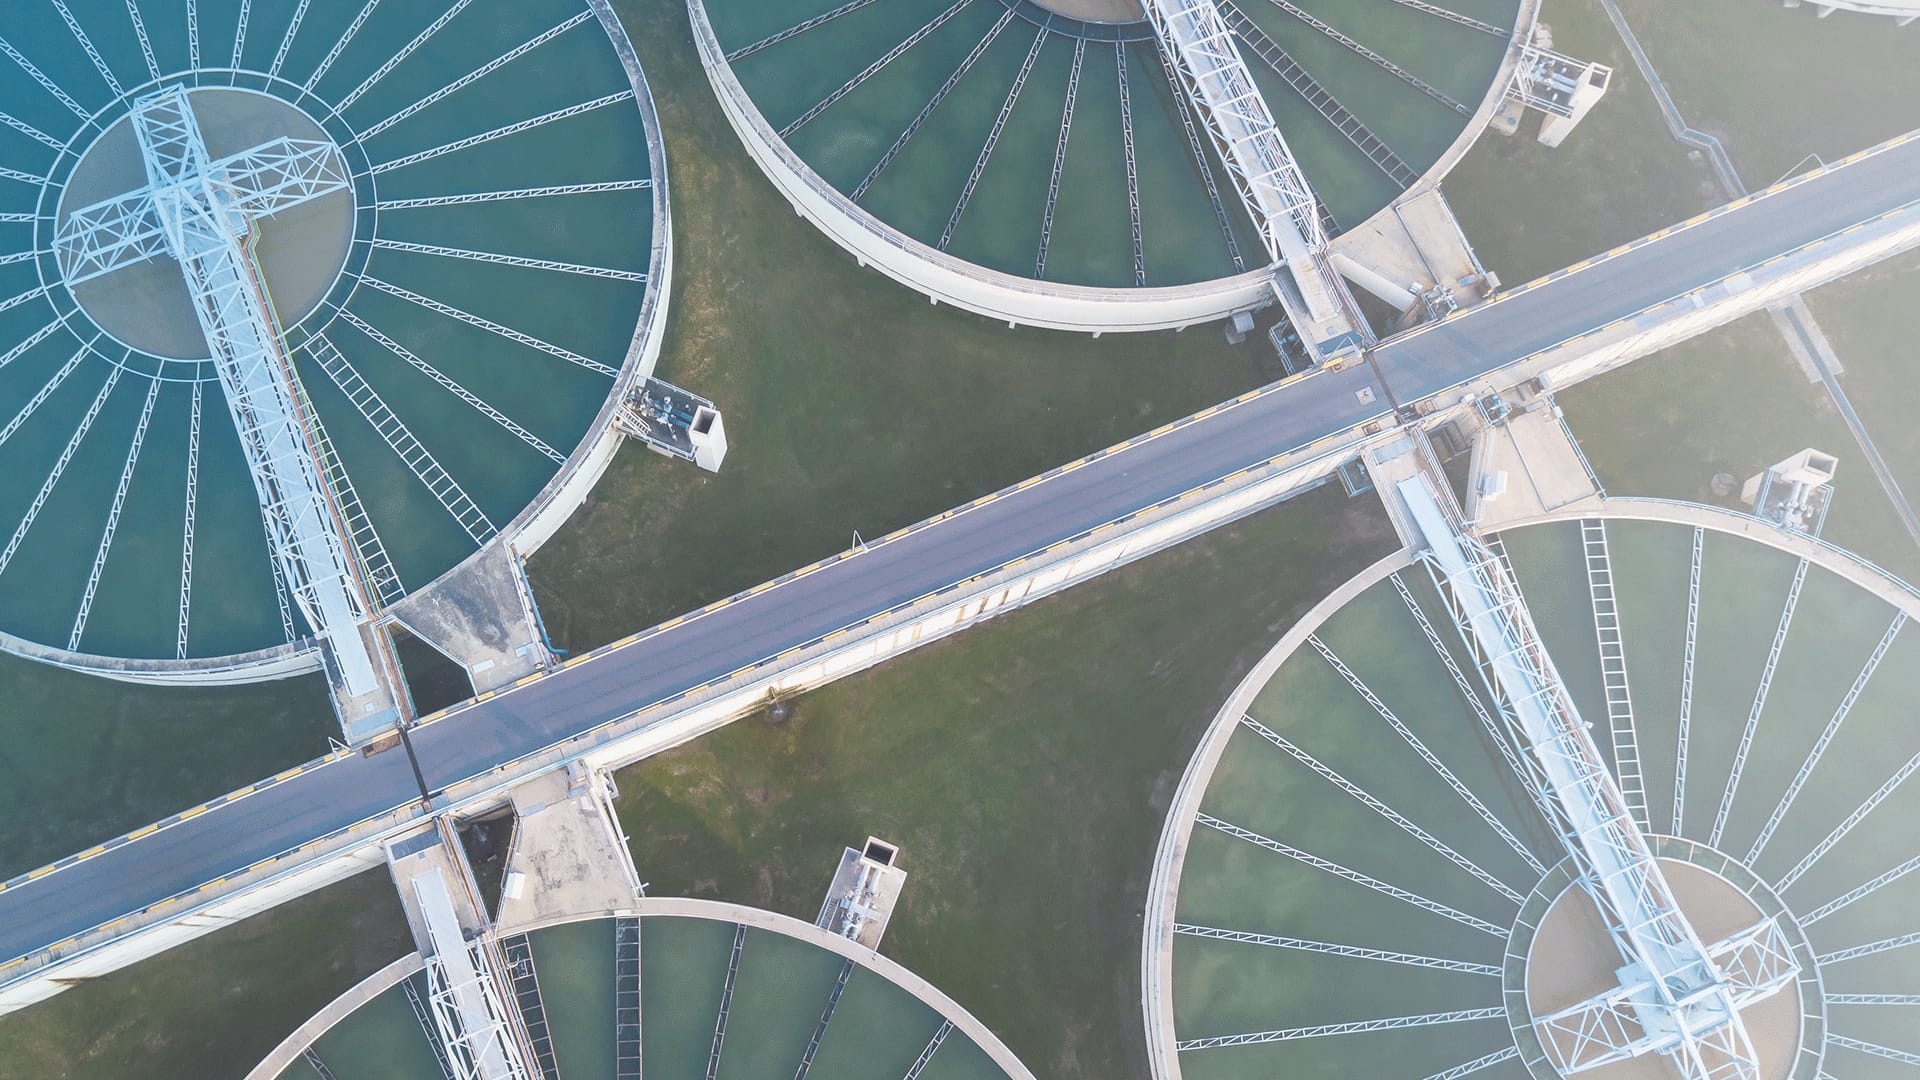 Sky view of wastewater treatments